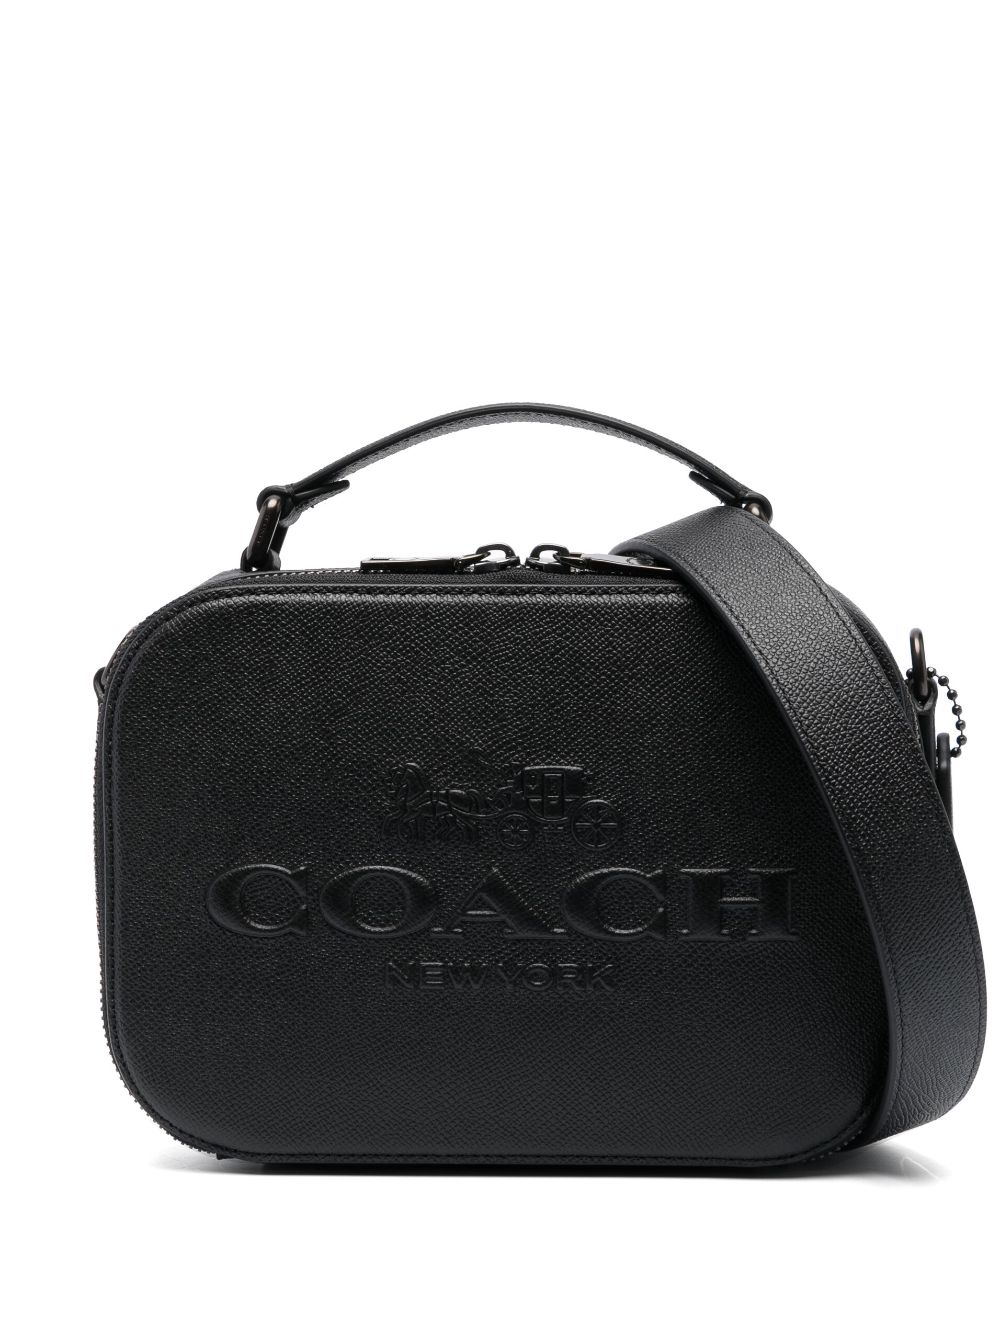 Coach Grained Leather Camera Bag - Black